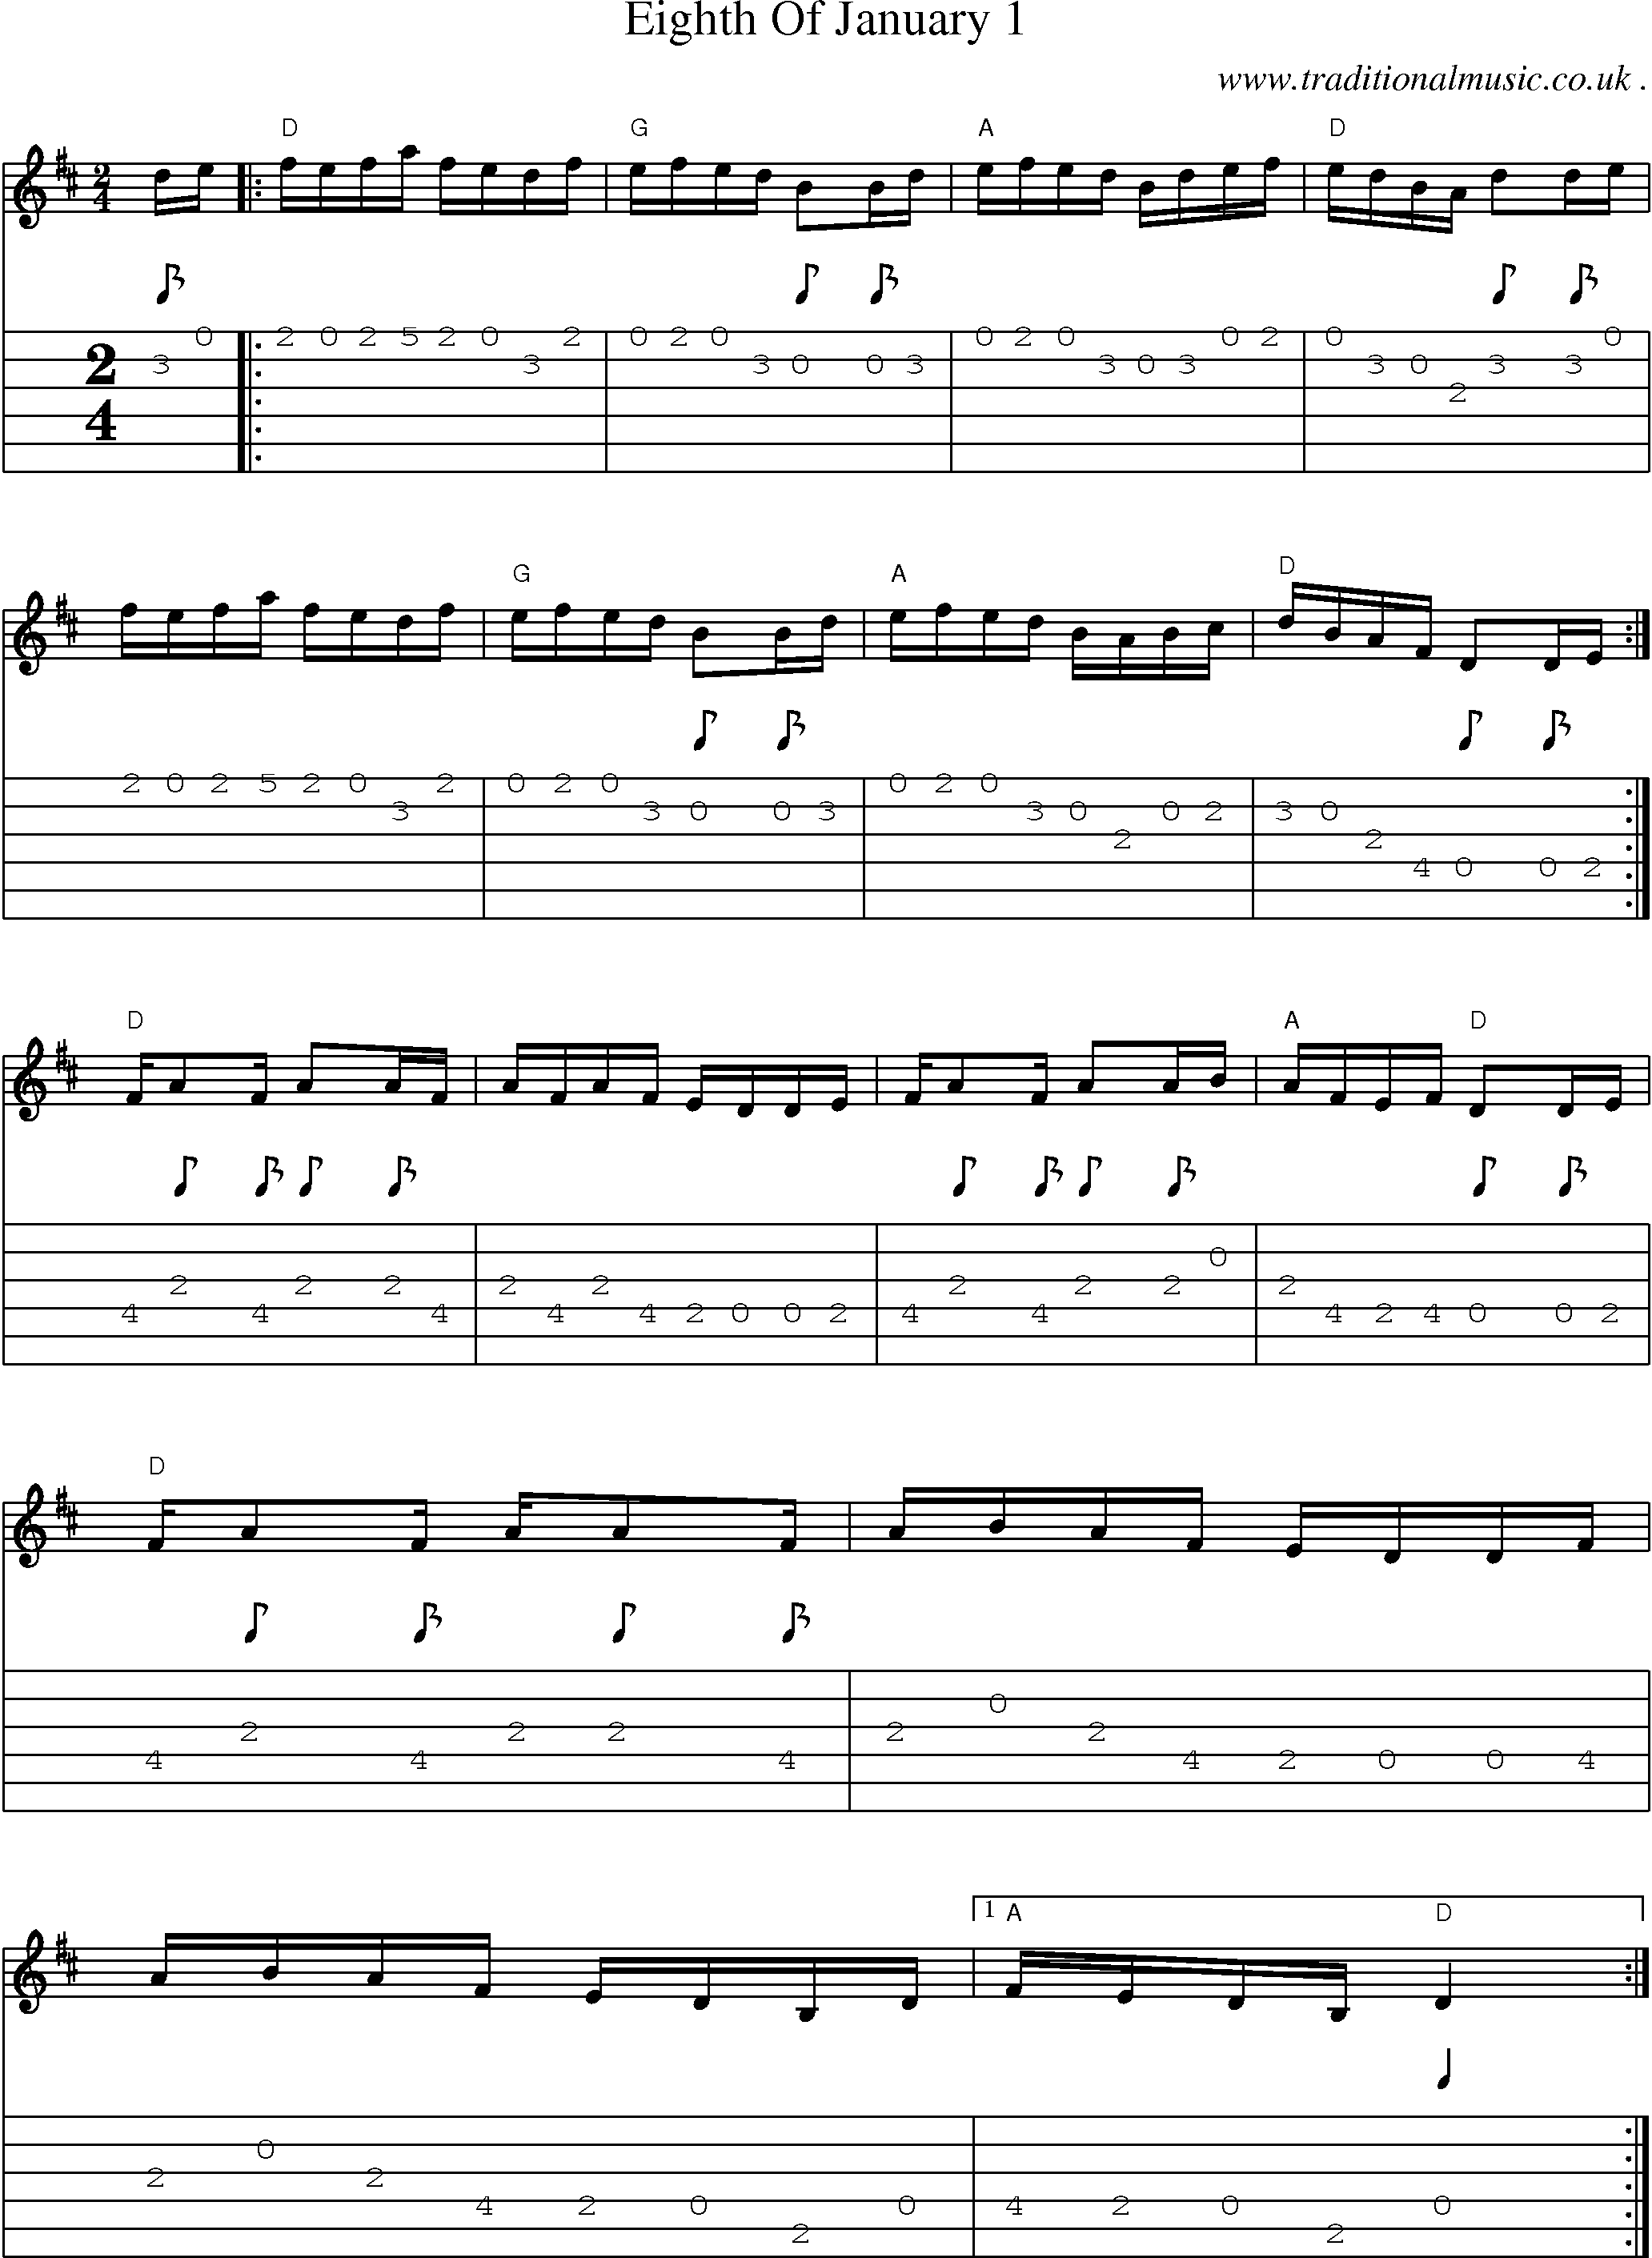 Music Score and Guitar Tabs for Eighth Of January 1